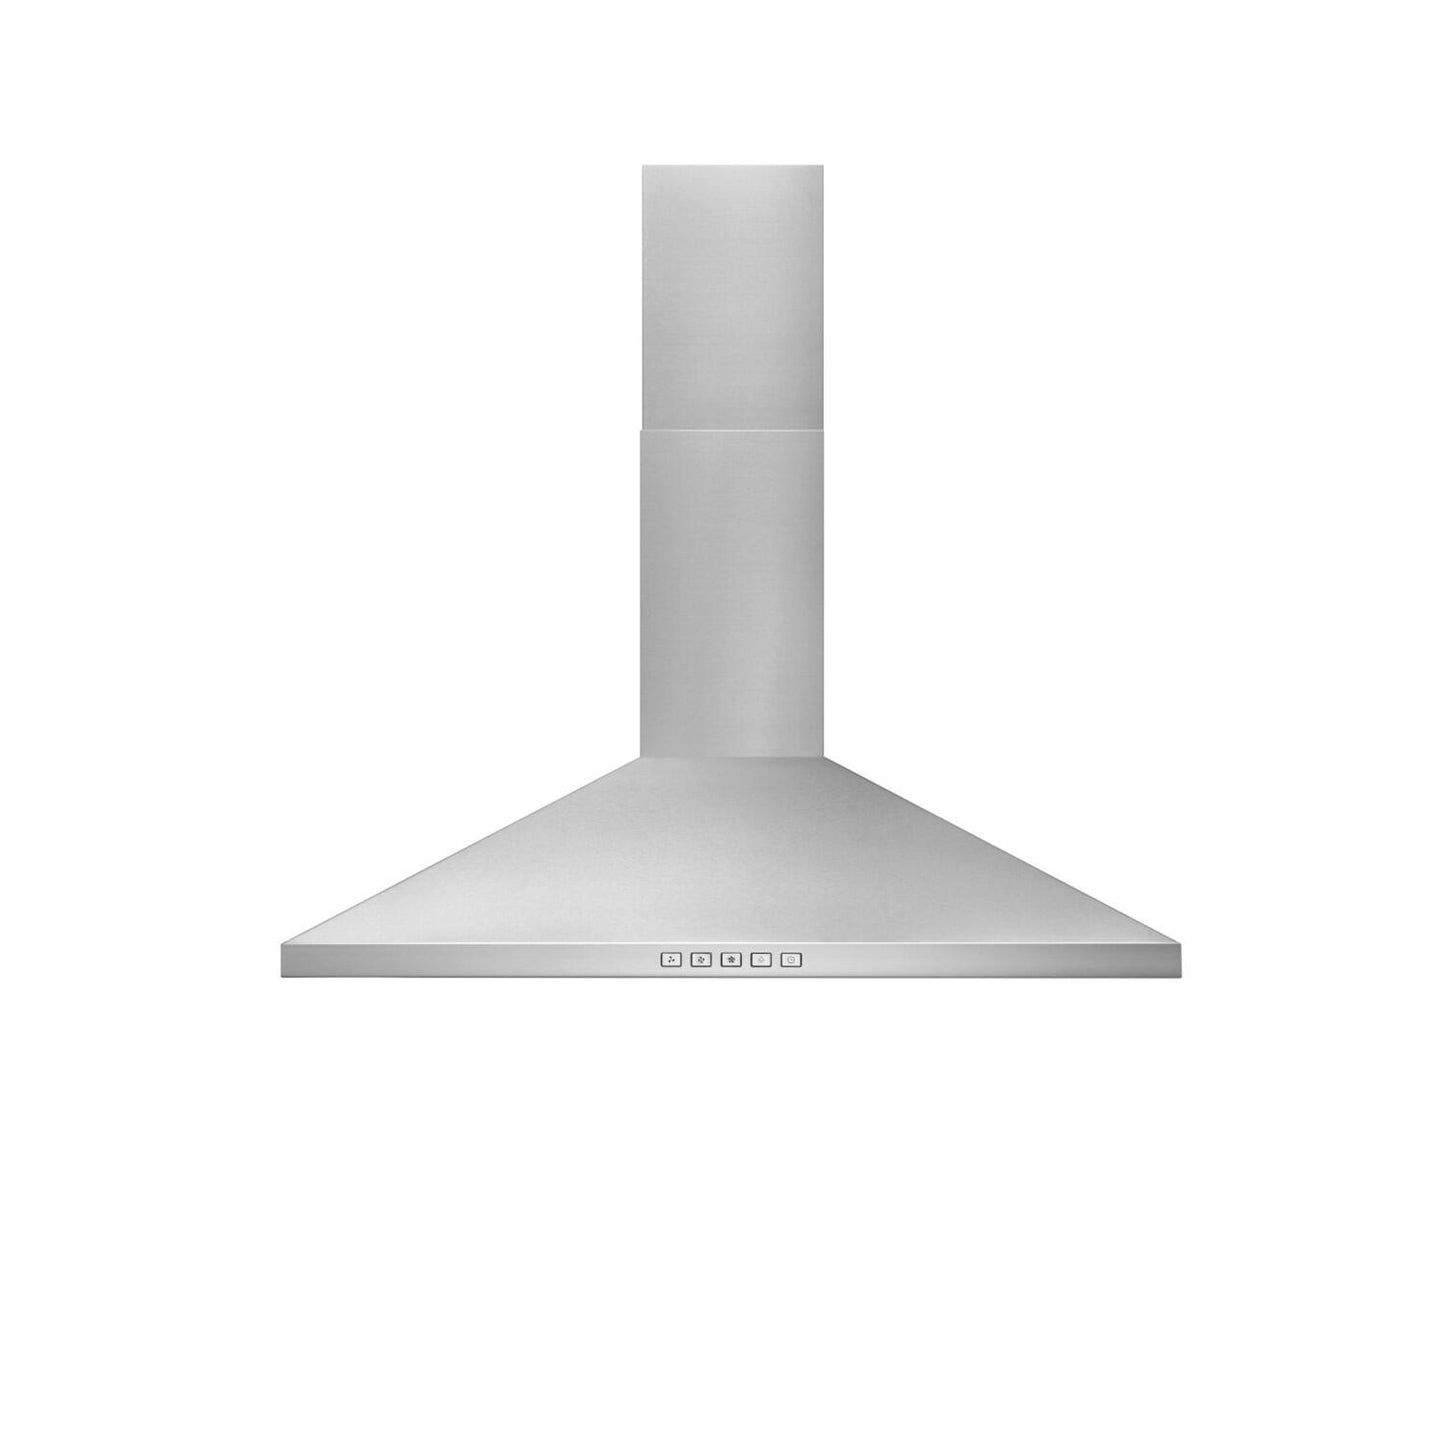 Broan BWP2306SS Broan® 30-Inch Convertible Wall-Mount Pyramidal Chimney Range Hood, 630 Max Cfm, Stainless Steel